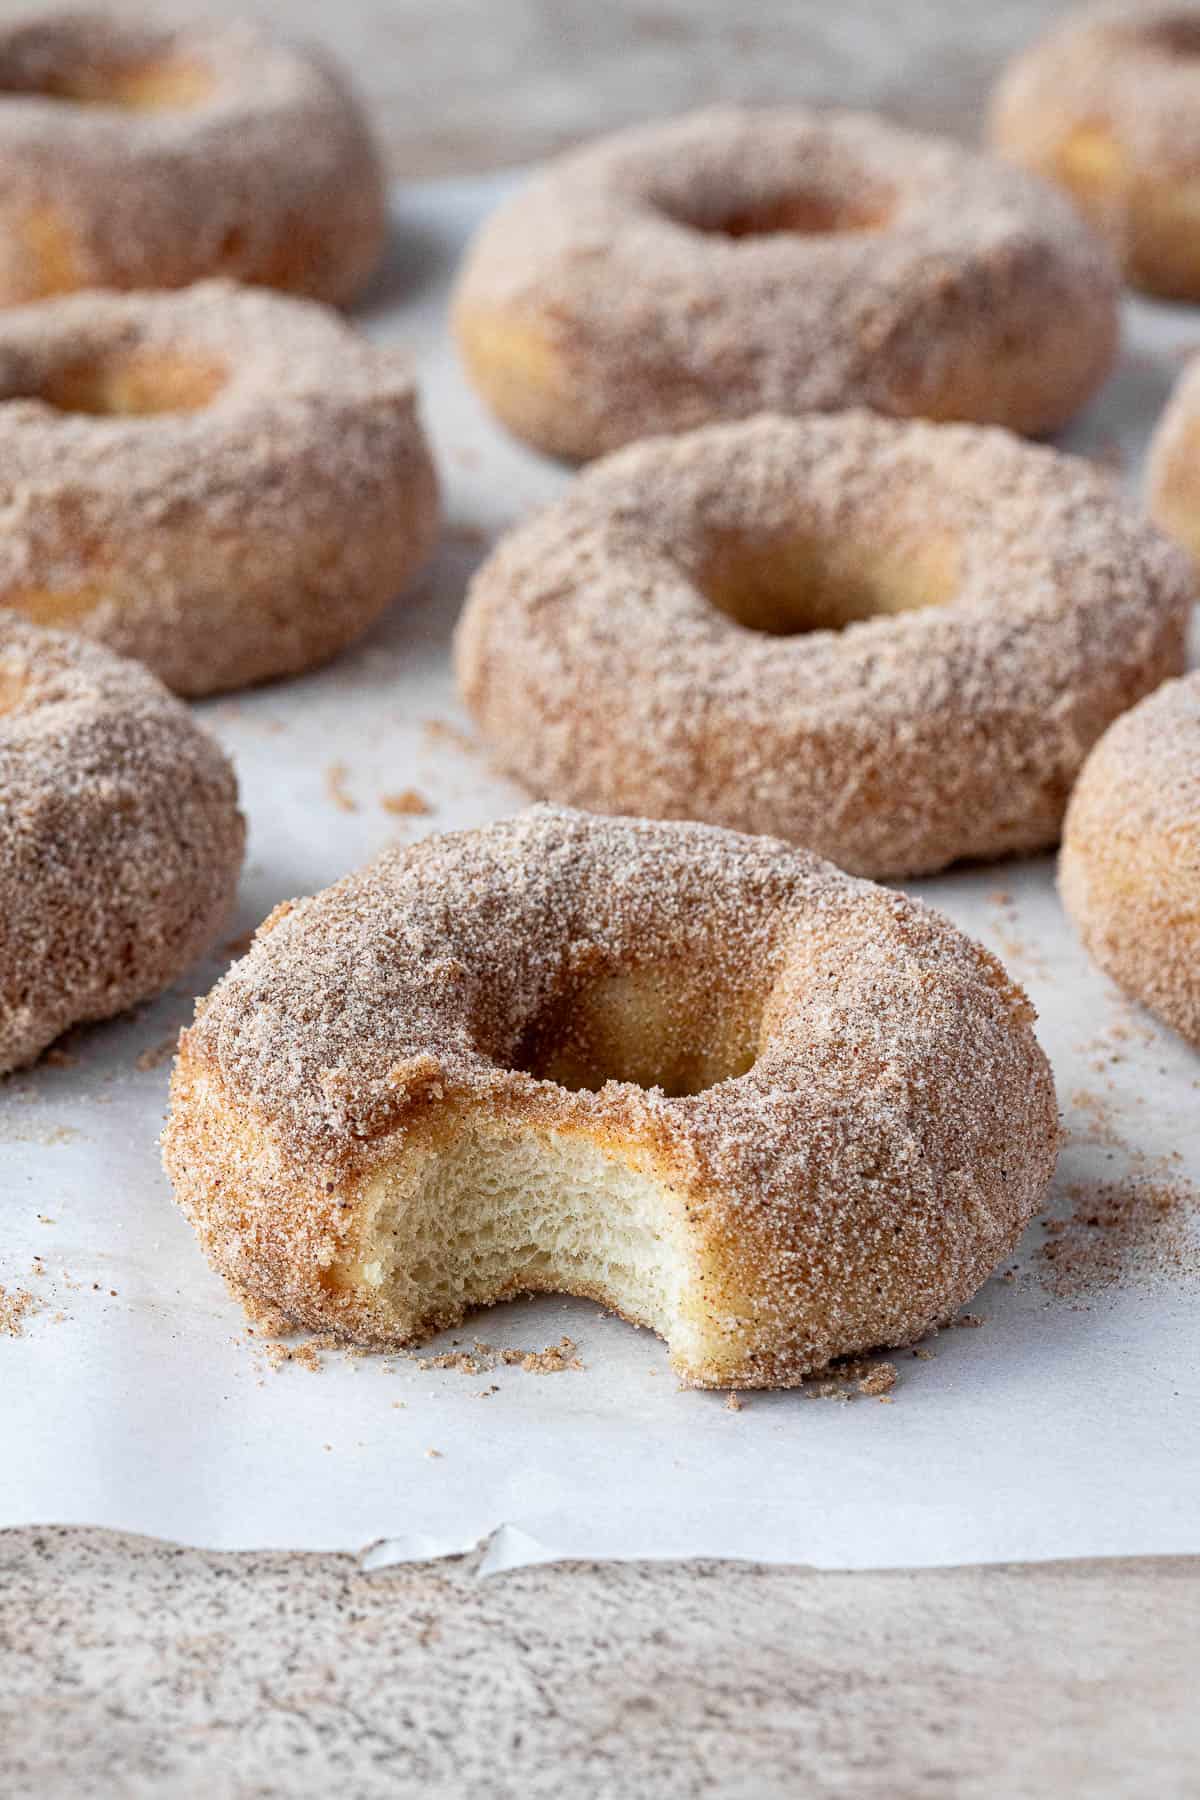 Cinnamon sugar doughnuts, one with a bite taken out of it.